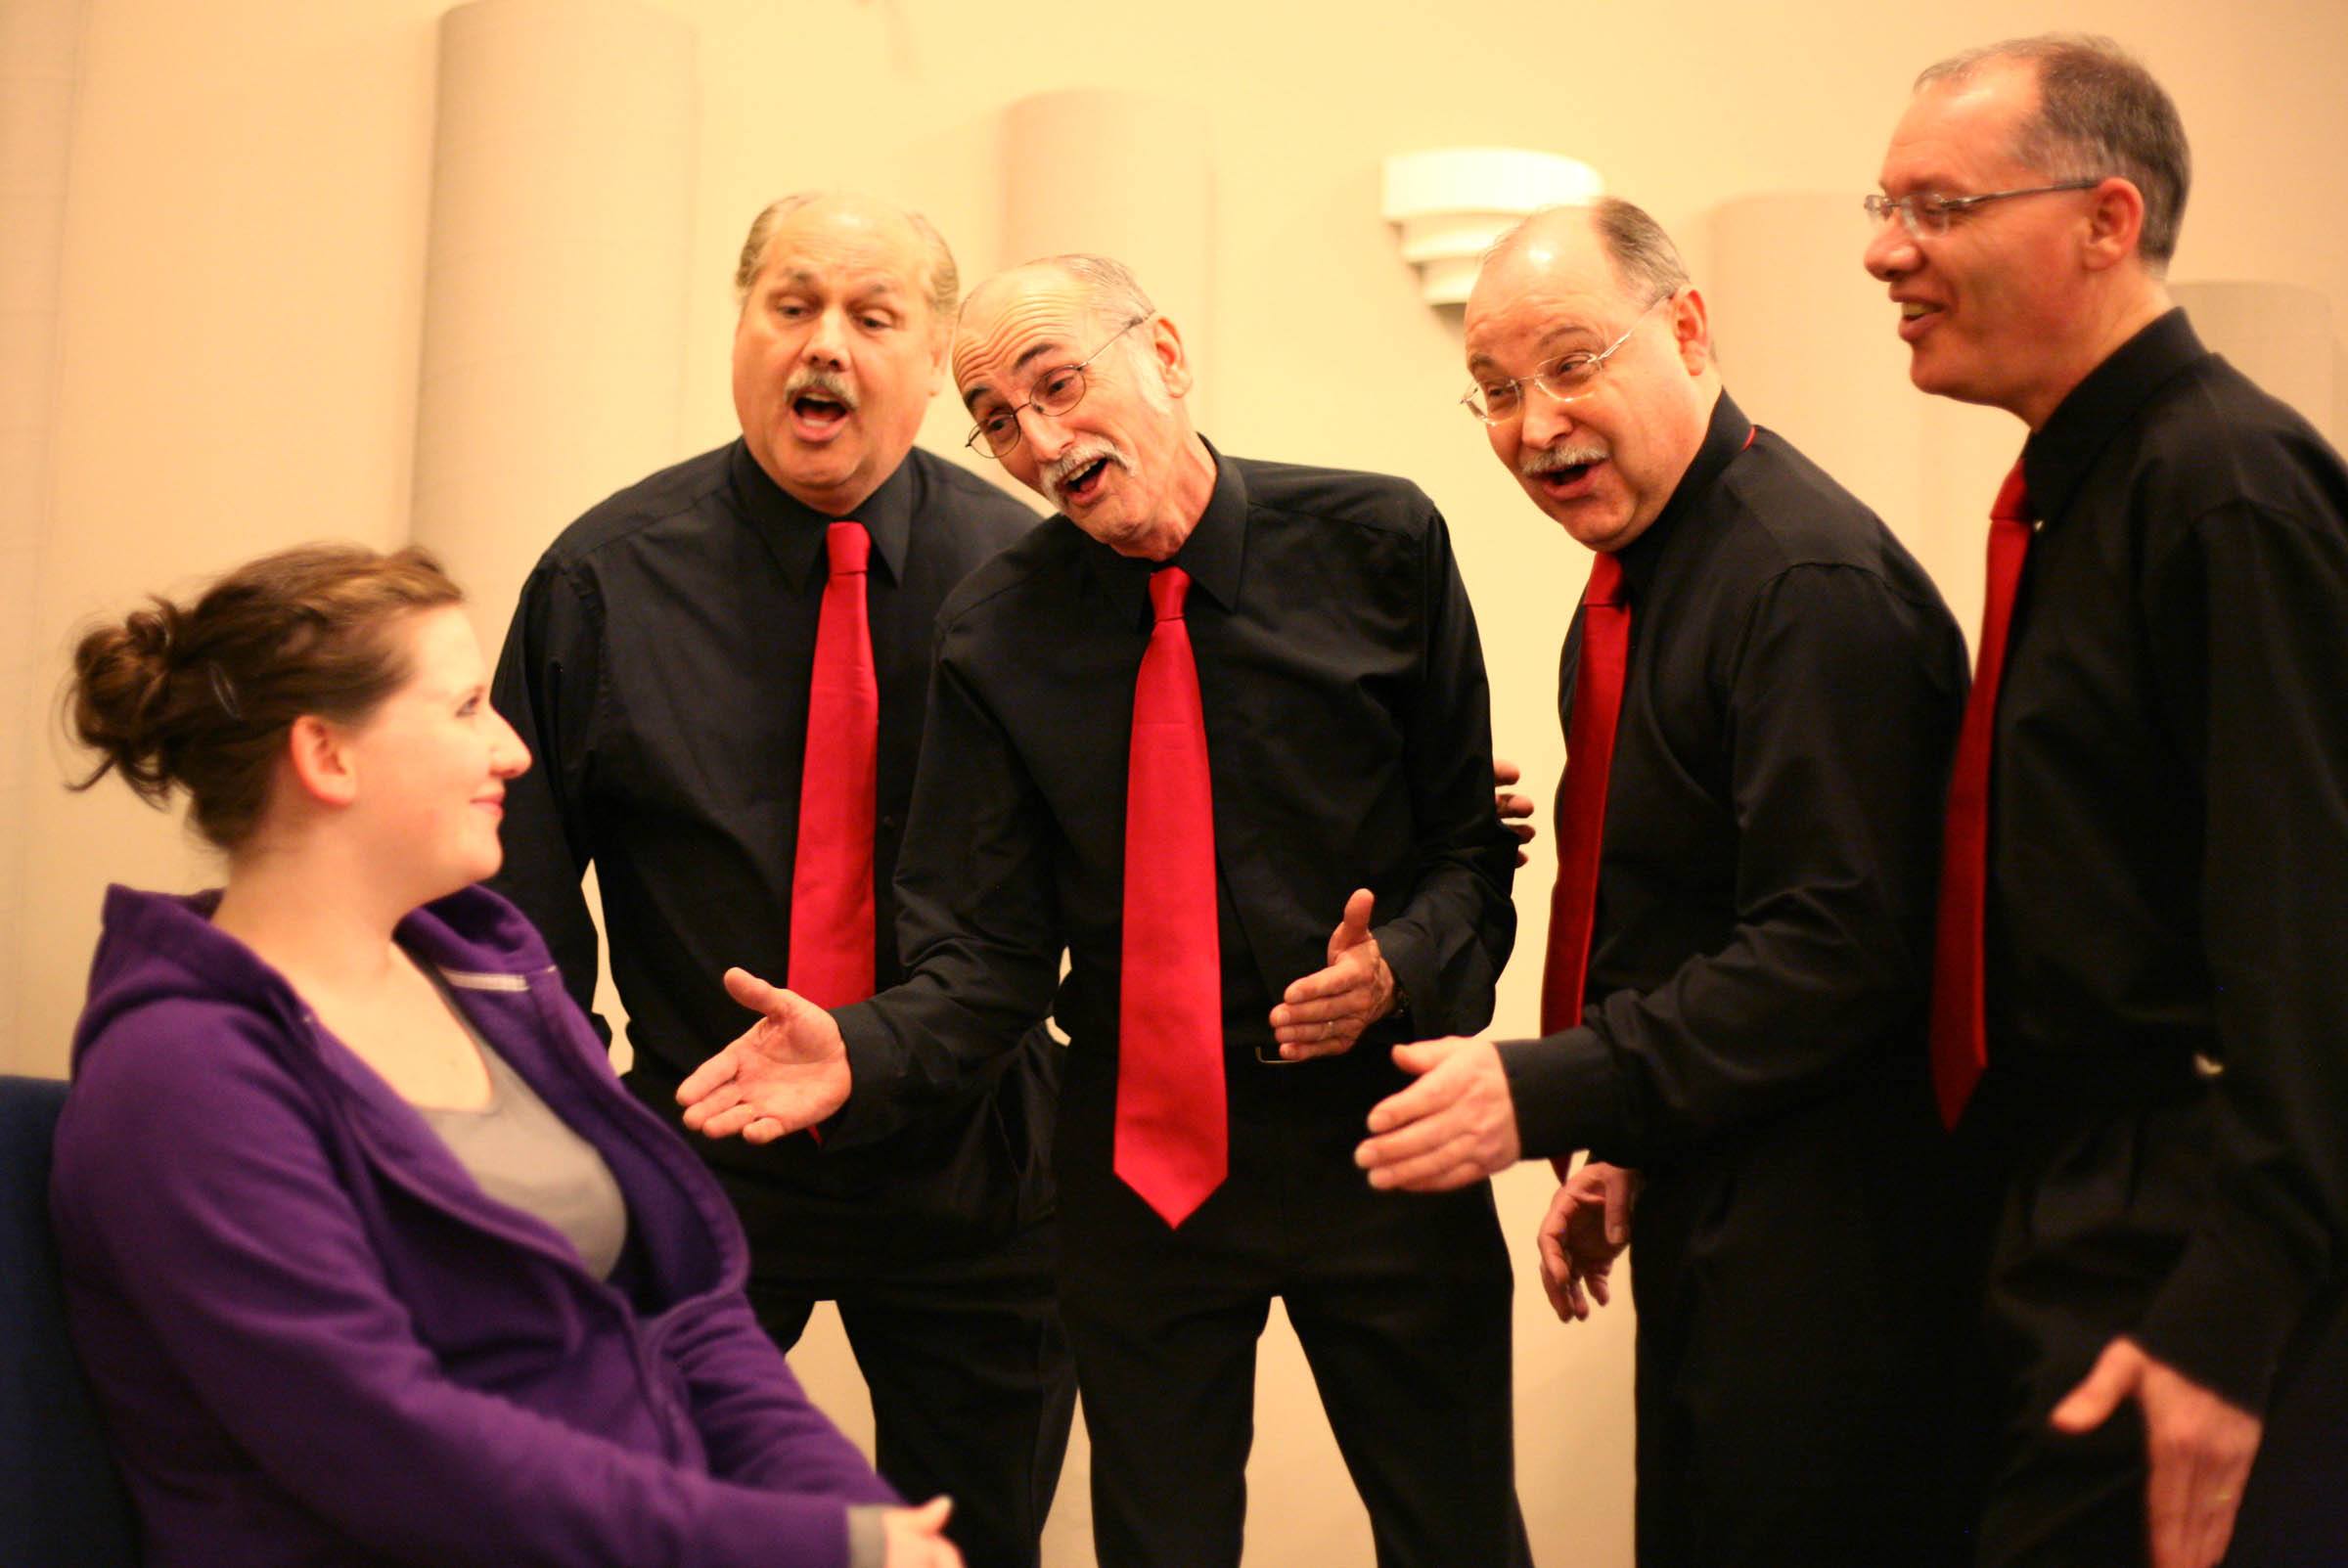 WITH LOVE- The Wild Rose Harmonizers Barbershop Chorus strike up a tune for a lucky lady during last year's Valentine's Day serenades.